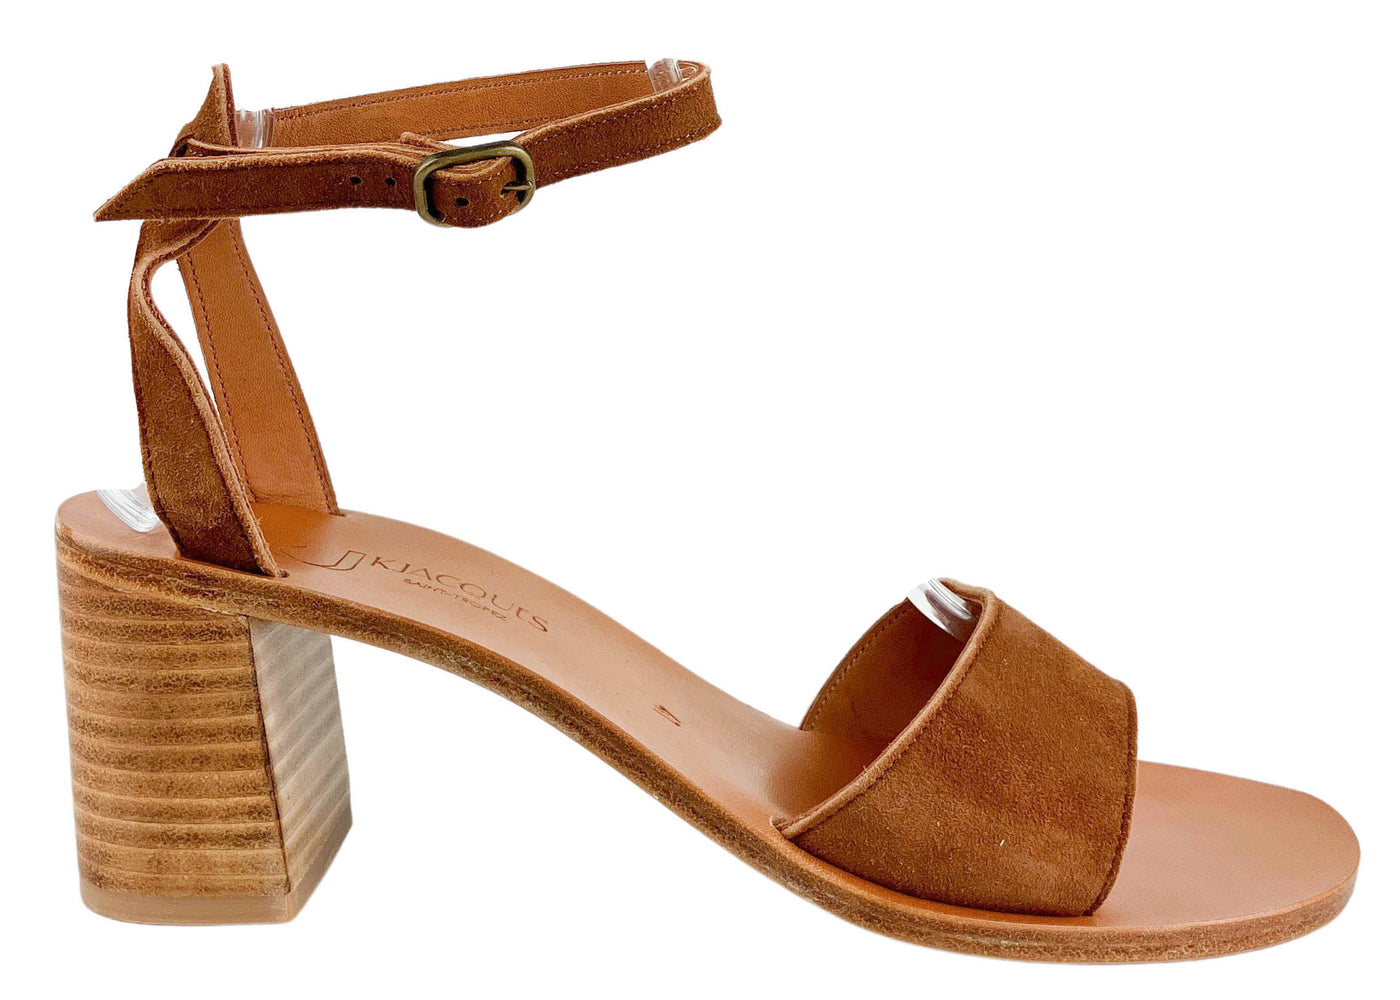 K.Jacques Albane Sandals in Amareto - Discounts on K. Jacques at UAL